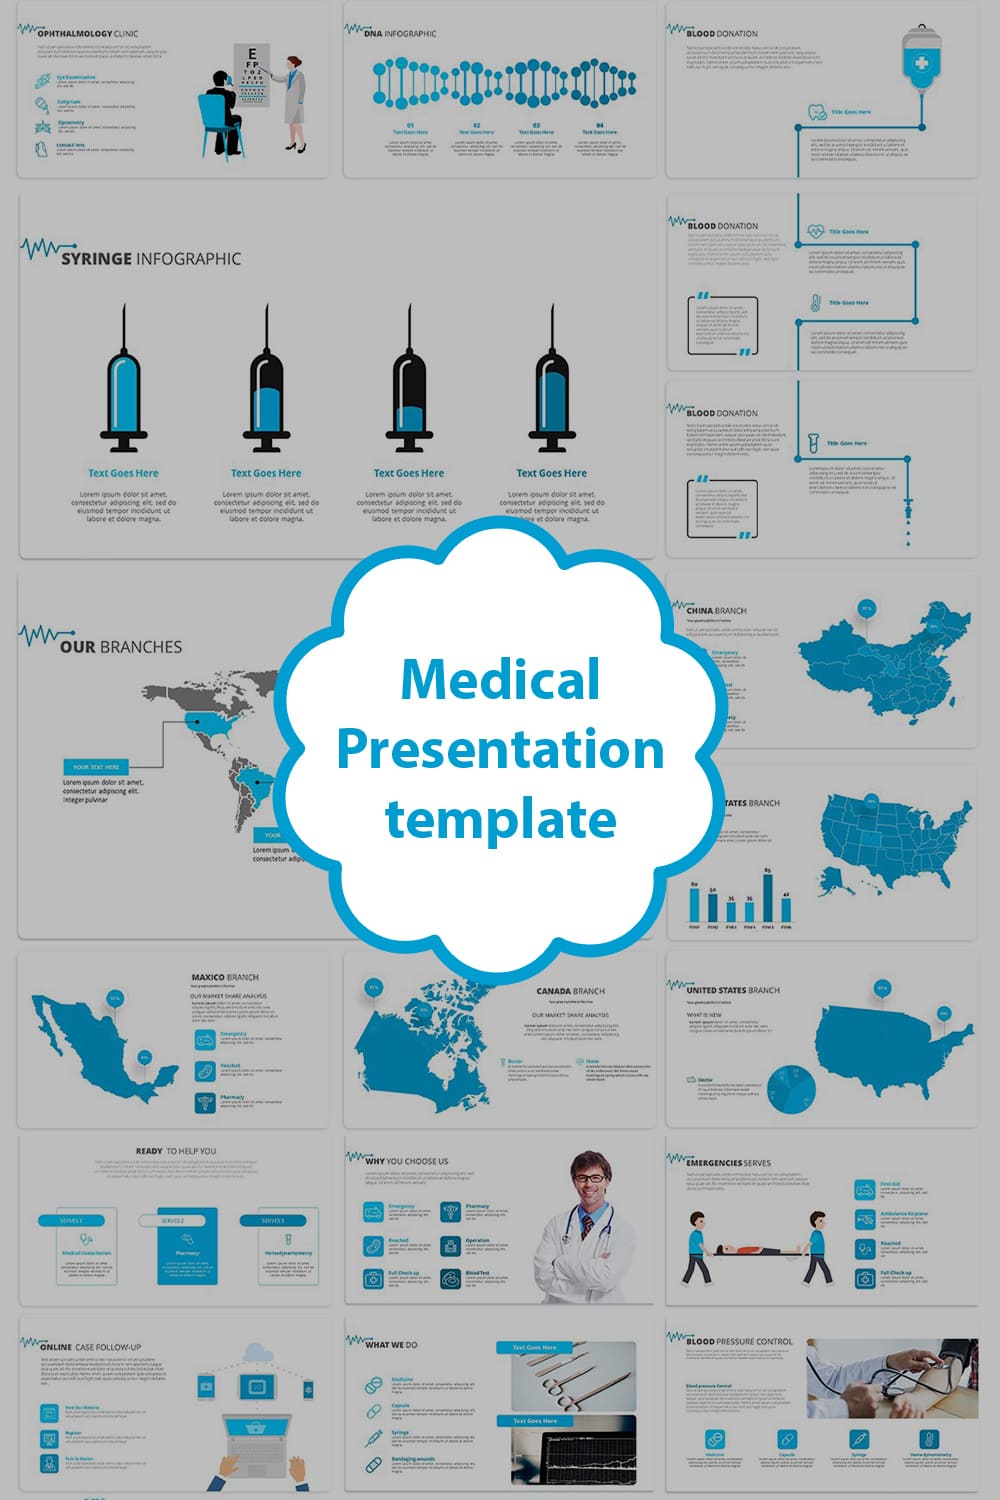 Medical Presentation Template - Preview.